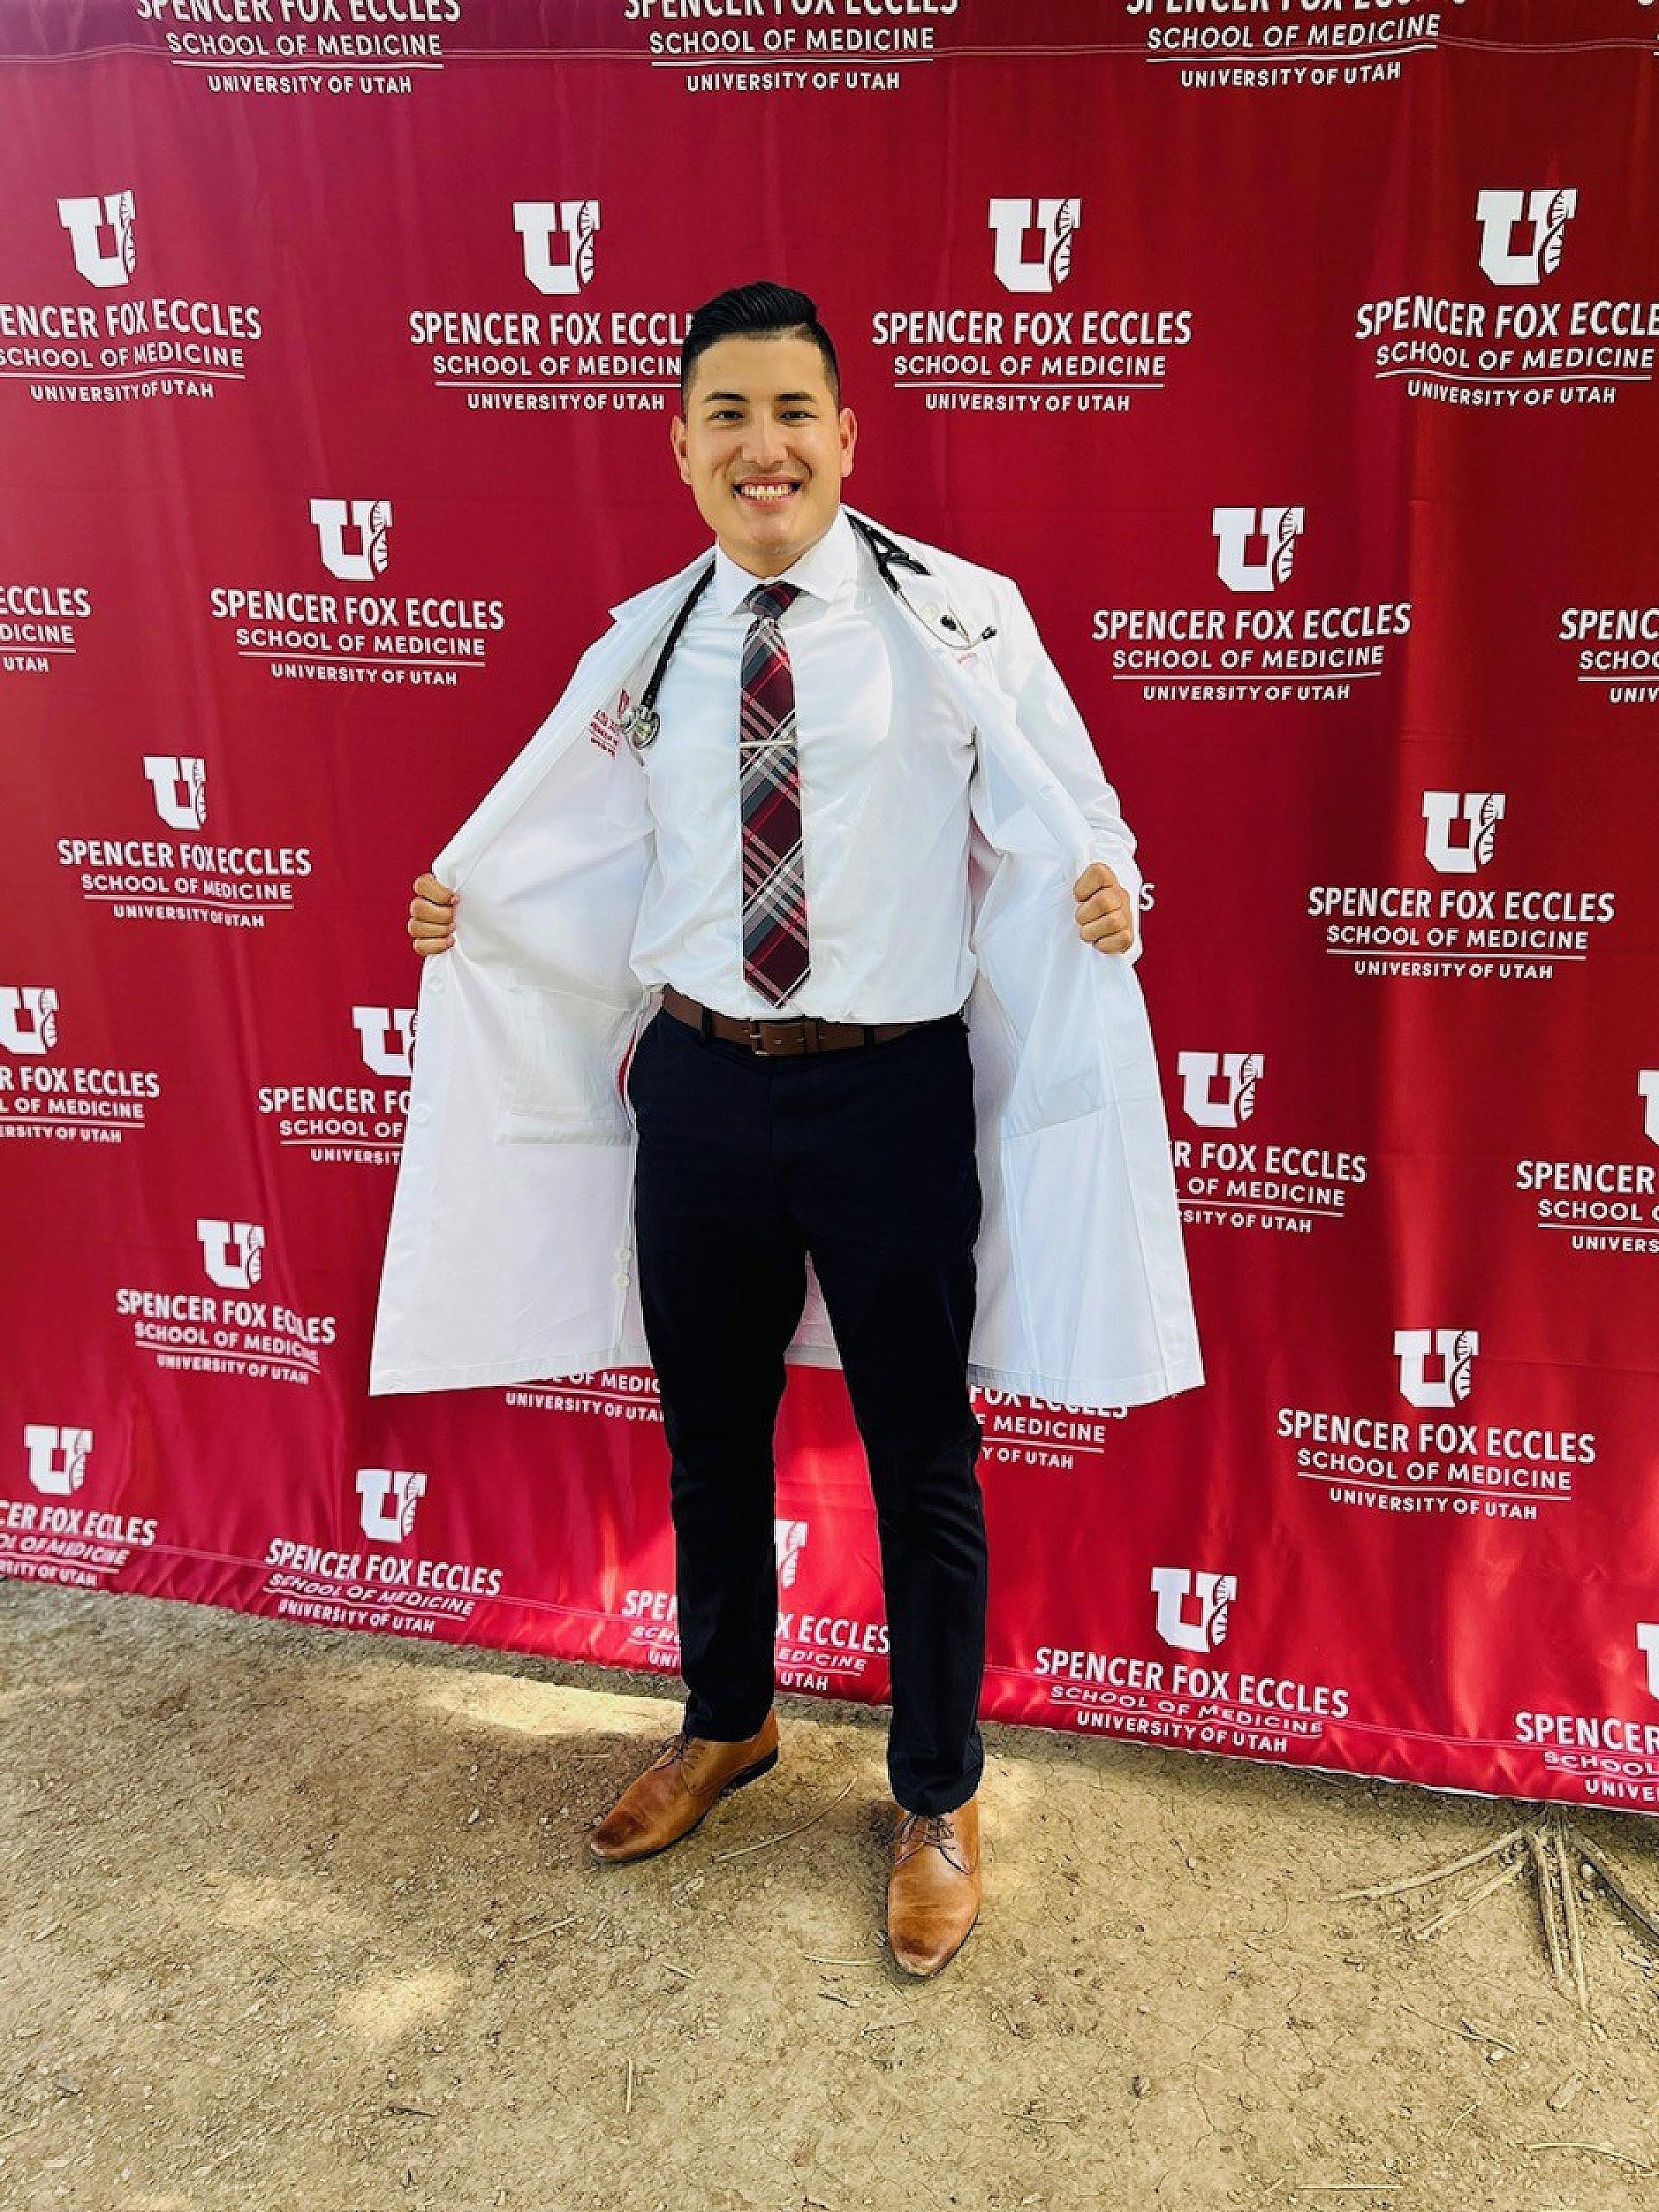 Adrian receives his White Coat at the annual ceremony, a rite of passage for medical students.